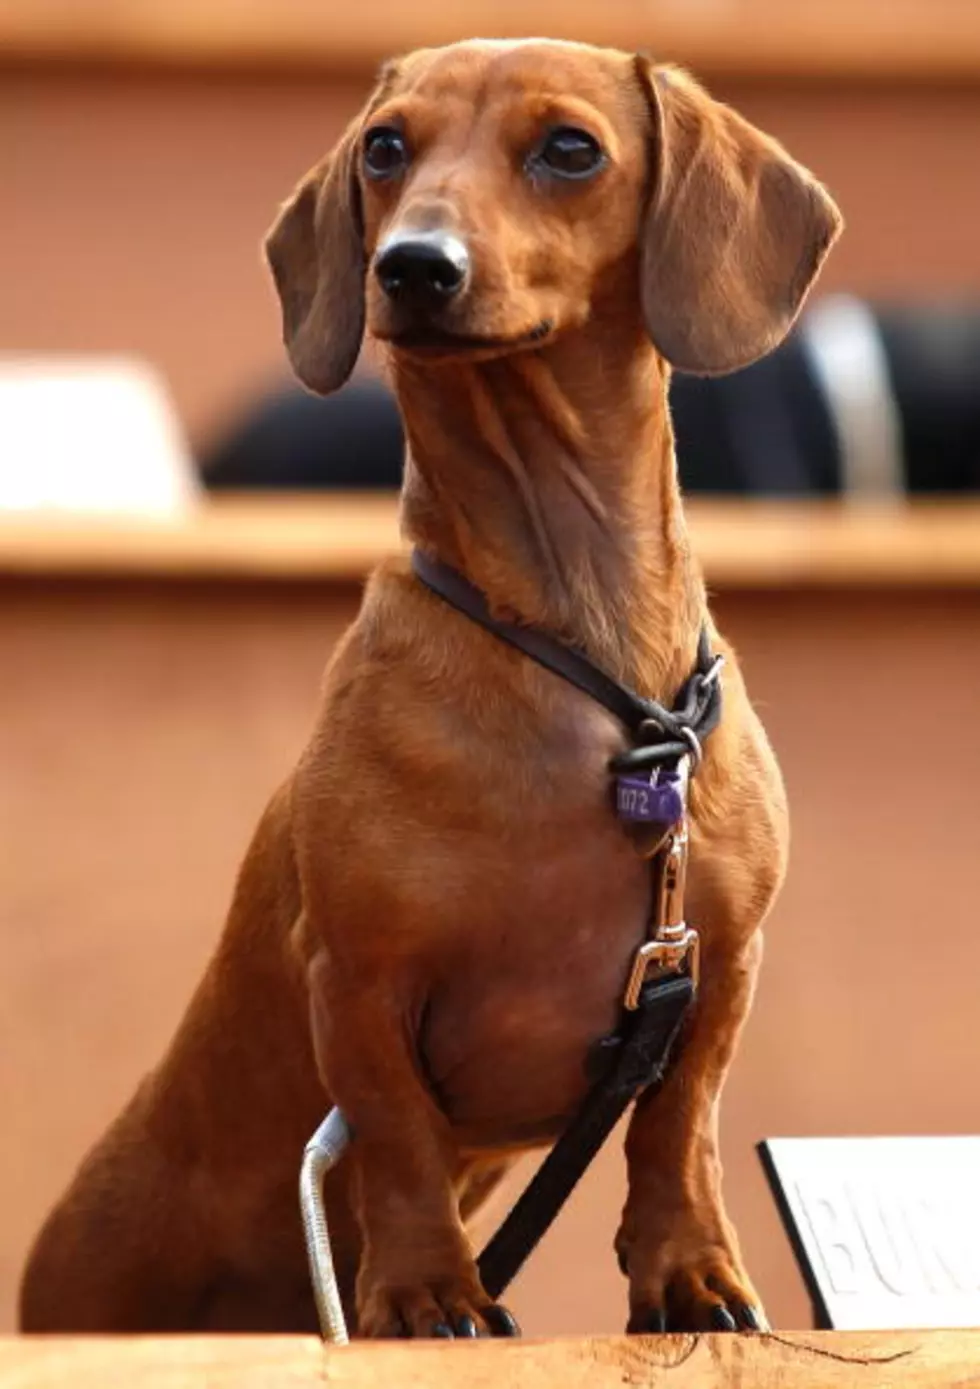 Dieting Dachshund Loses 75% of His Body Weight. Now He&#8217;s Ripped! [Watch]